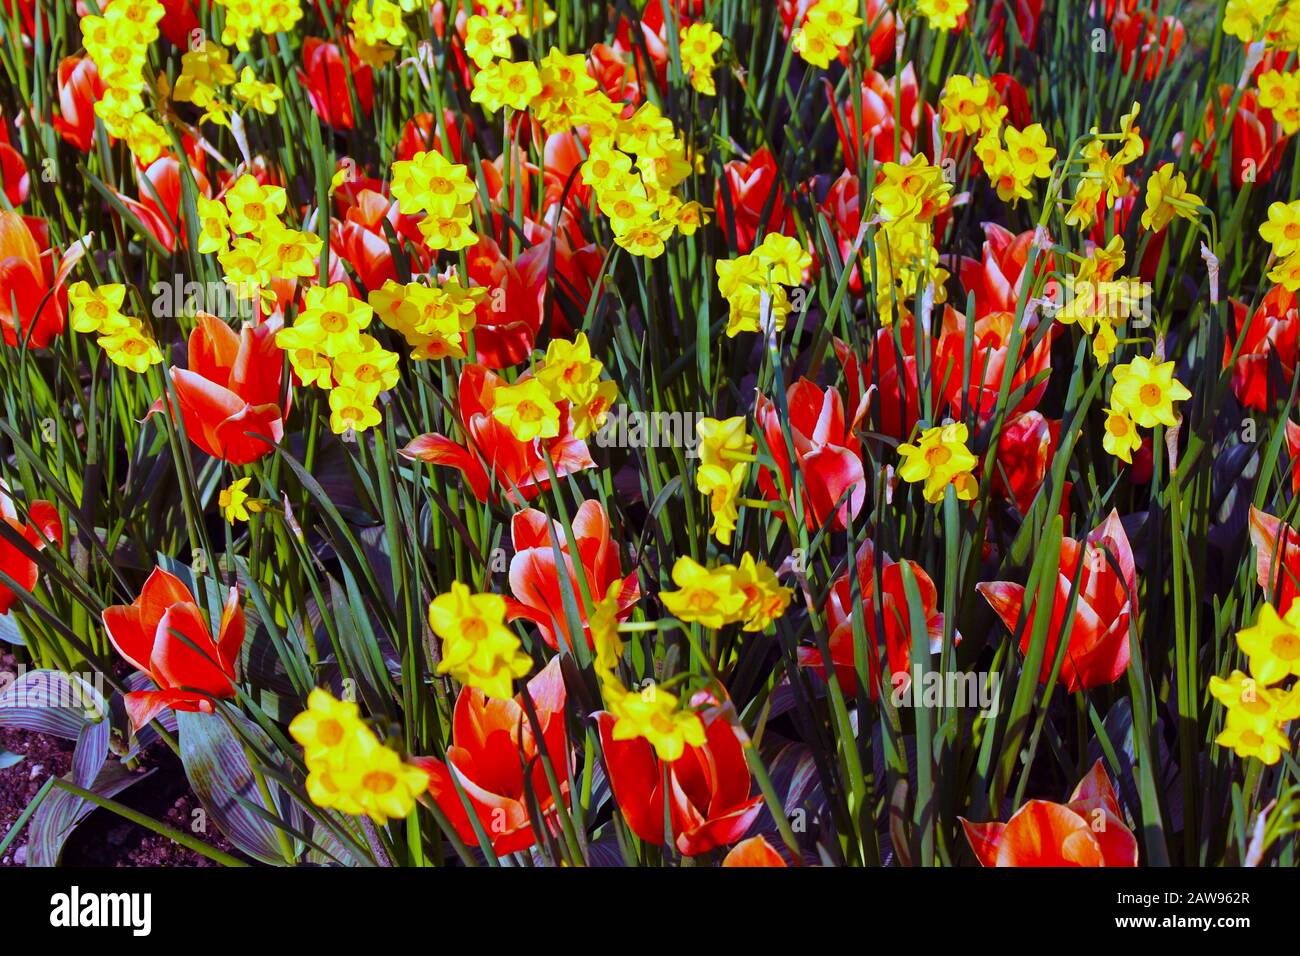 Red and yellow spring flowers in Europe Stock Photo